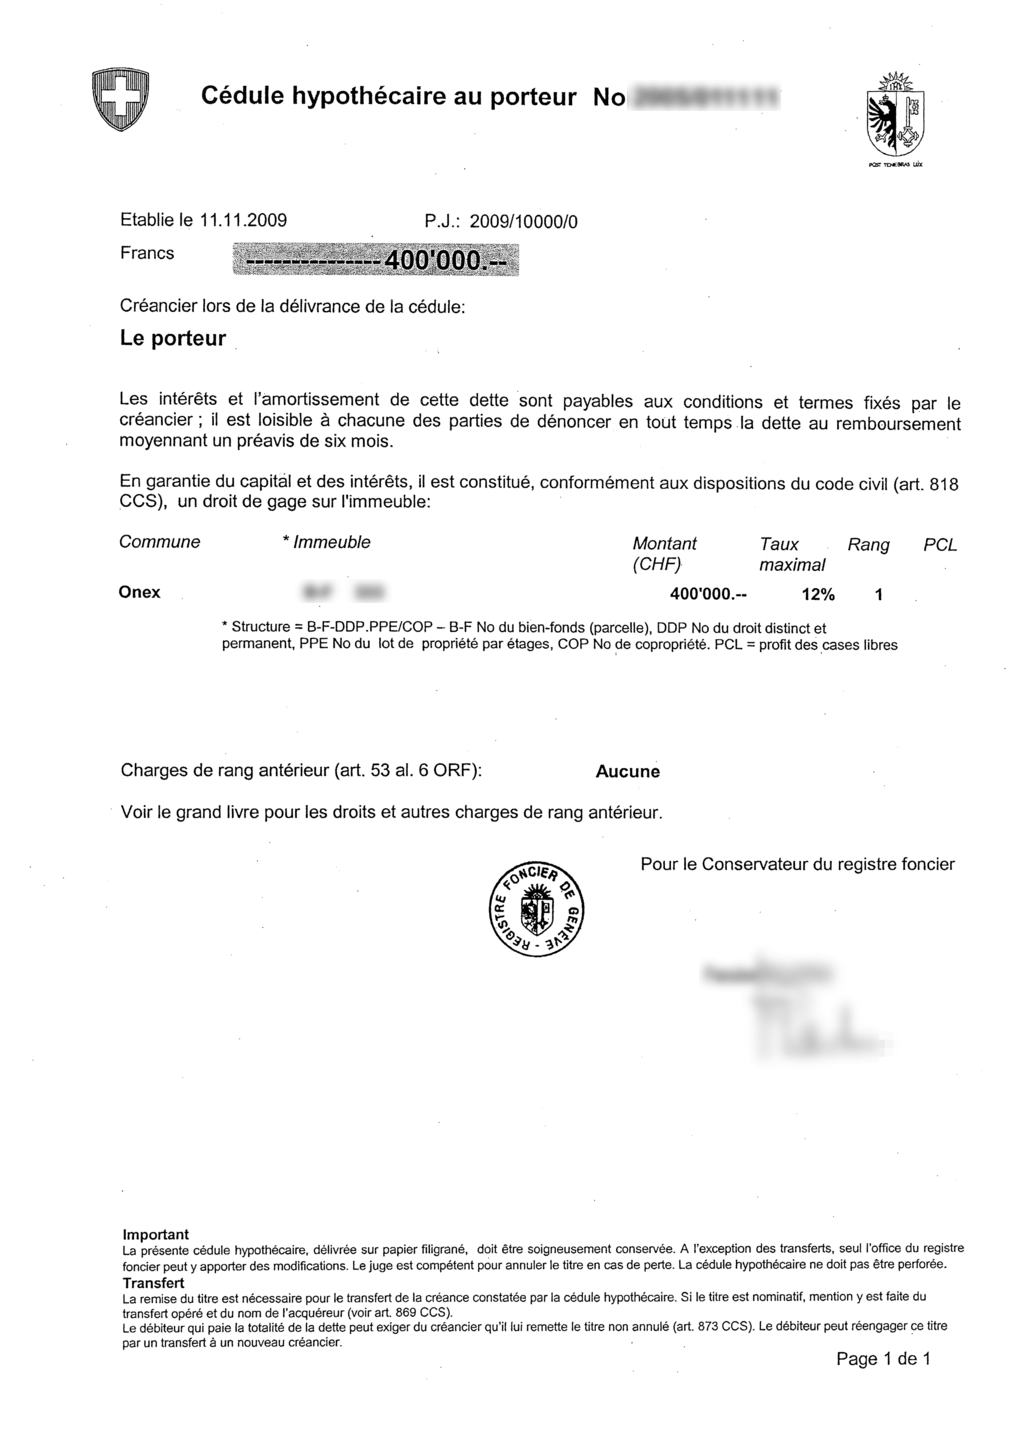 Example of a mortgage certificate